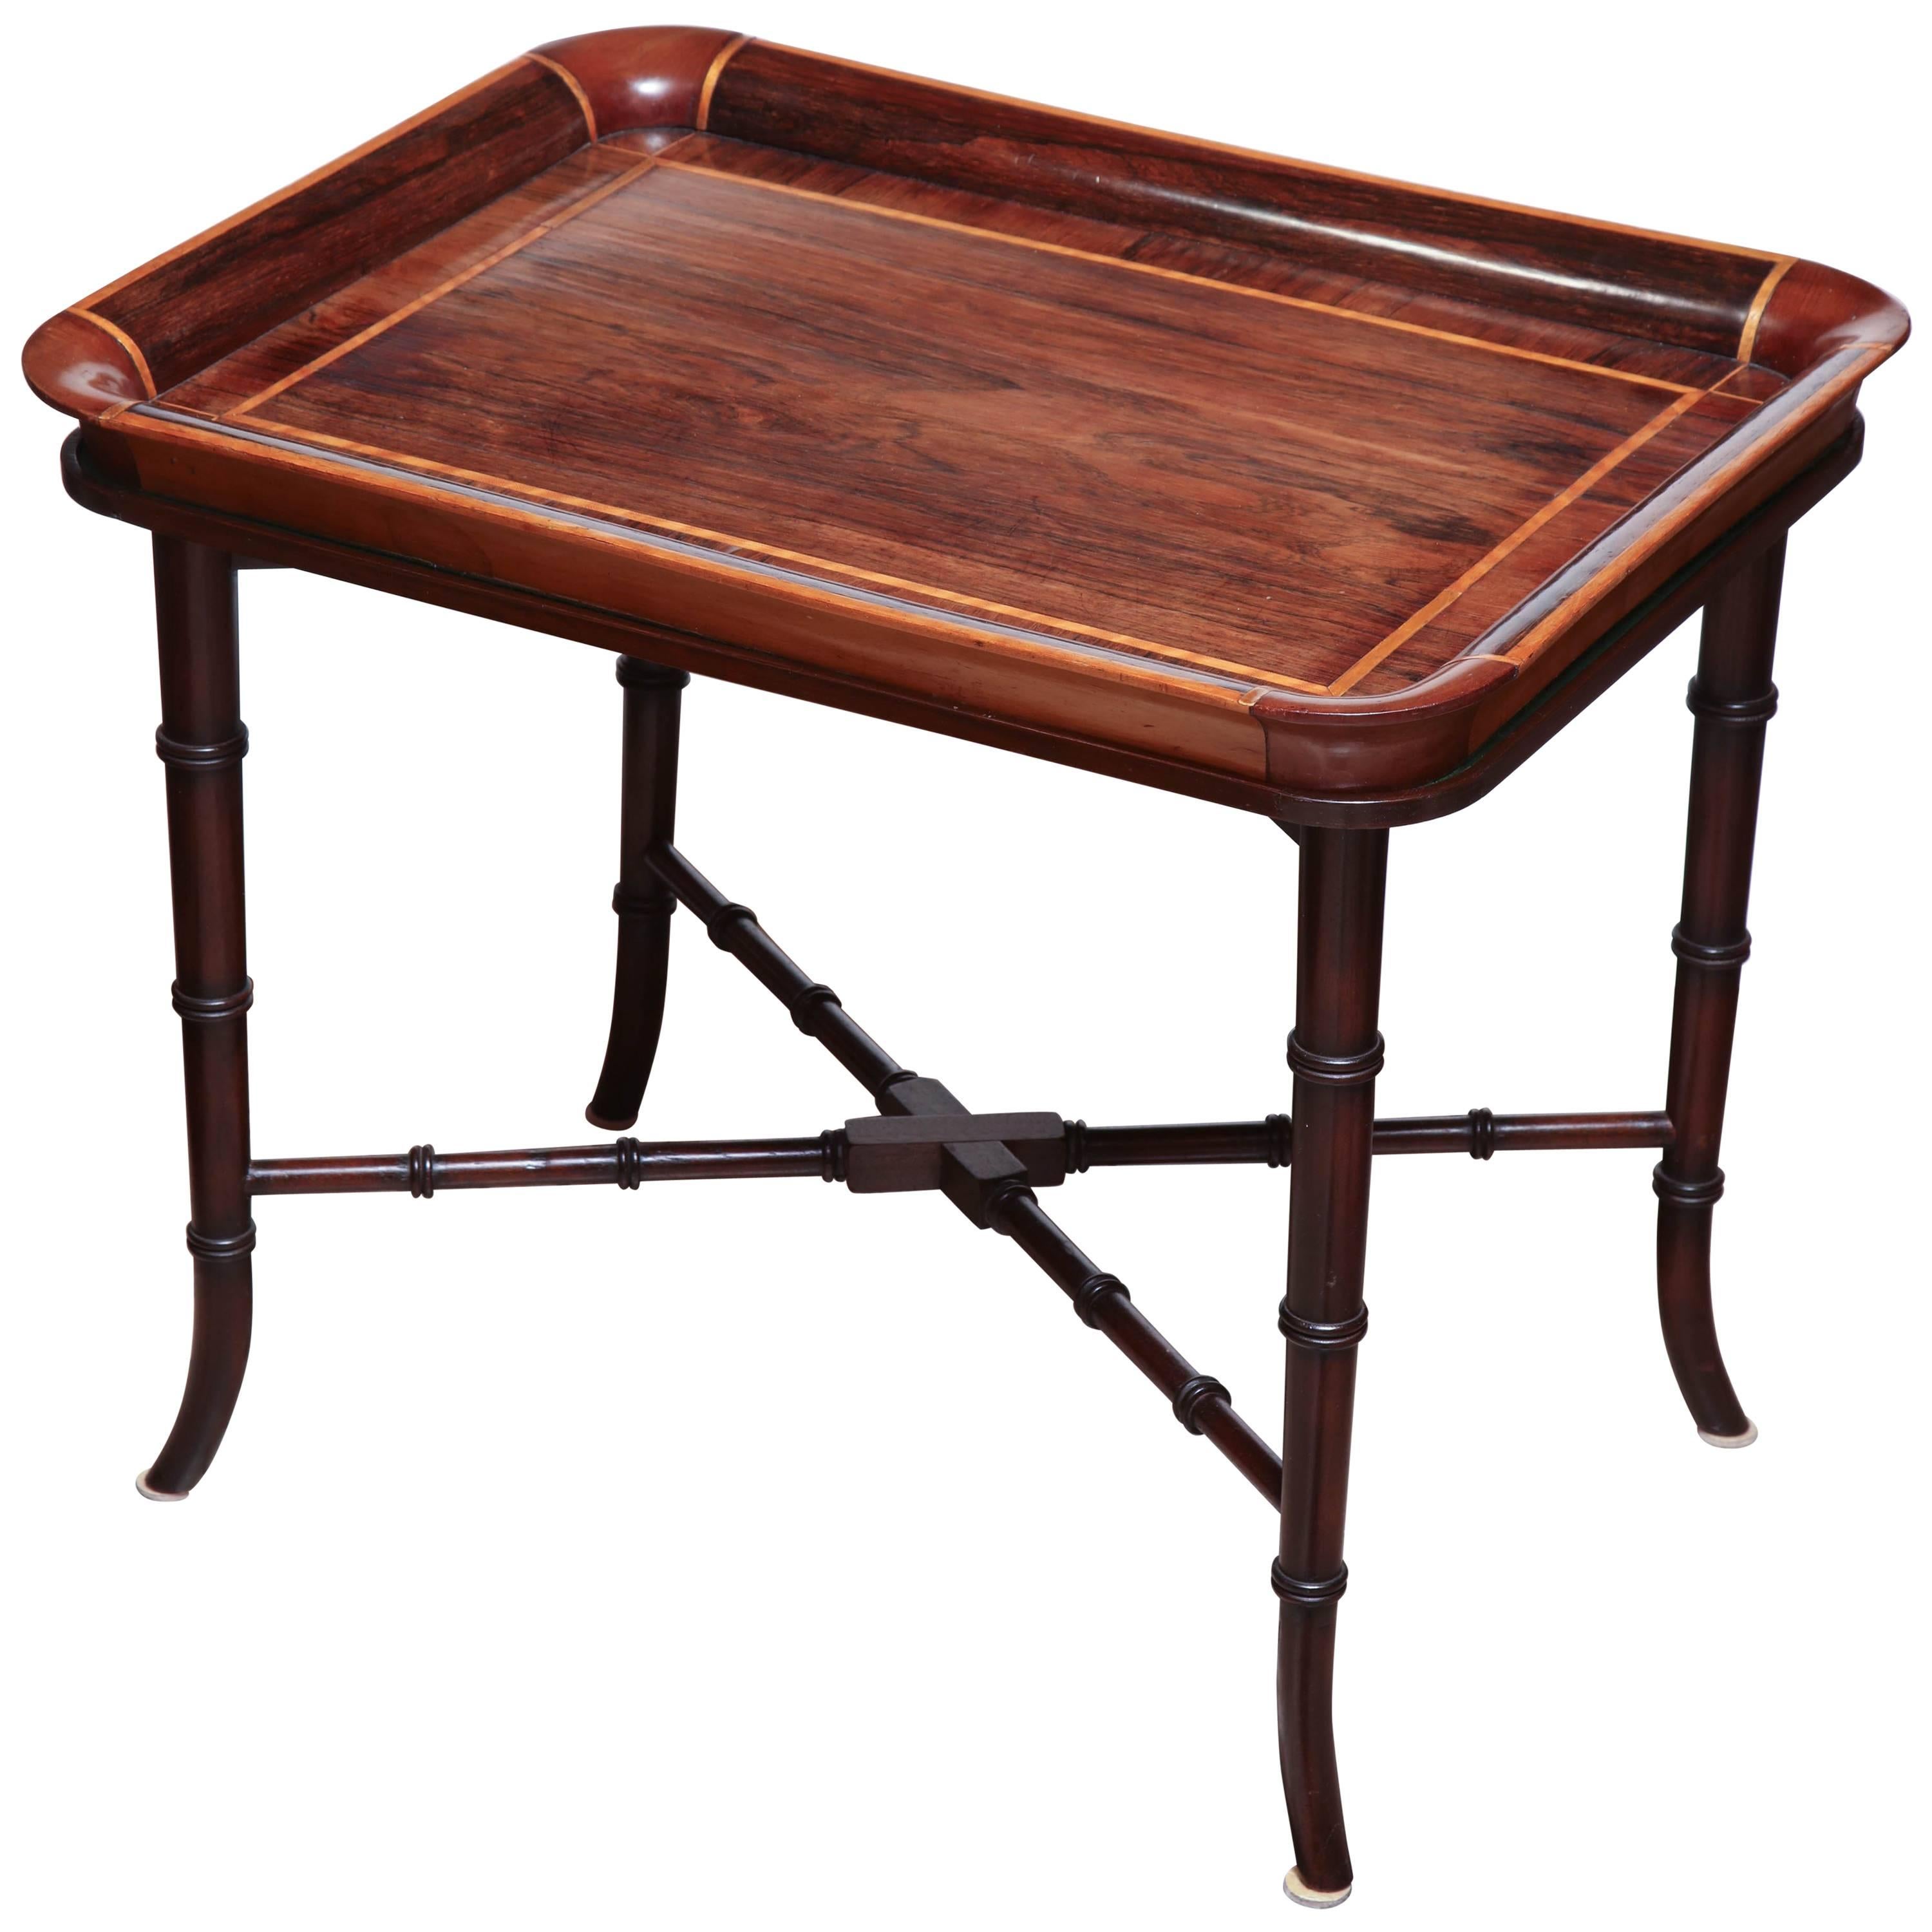 English Rosewood Tray Top Coffee Table